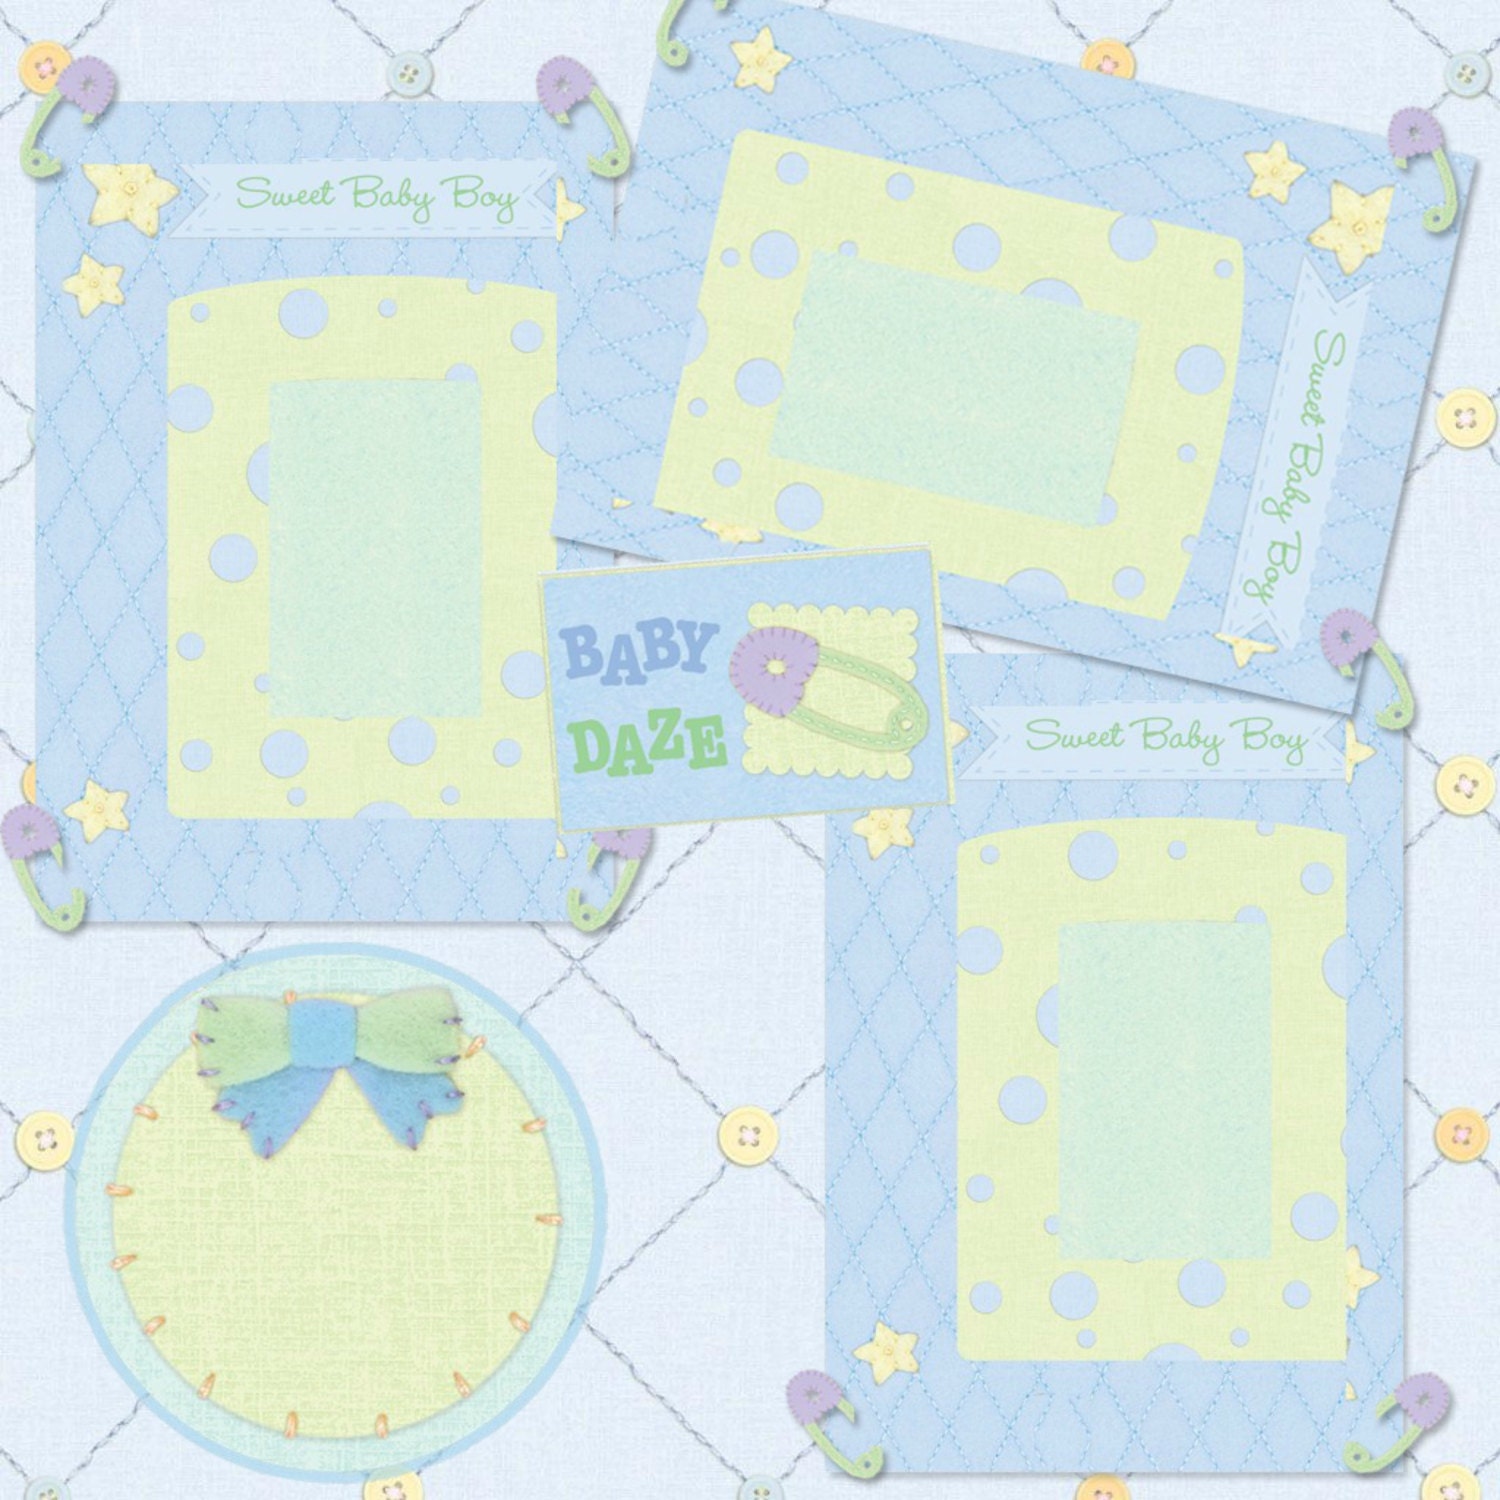 scrapbook-templates-printable-scrapbook-for-baby-boy-pages-8-pages-digital-scrapbook